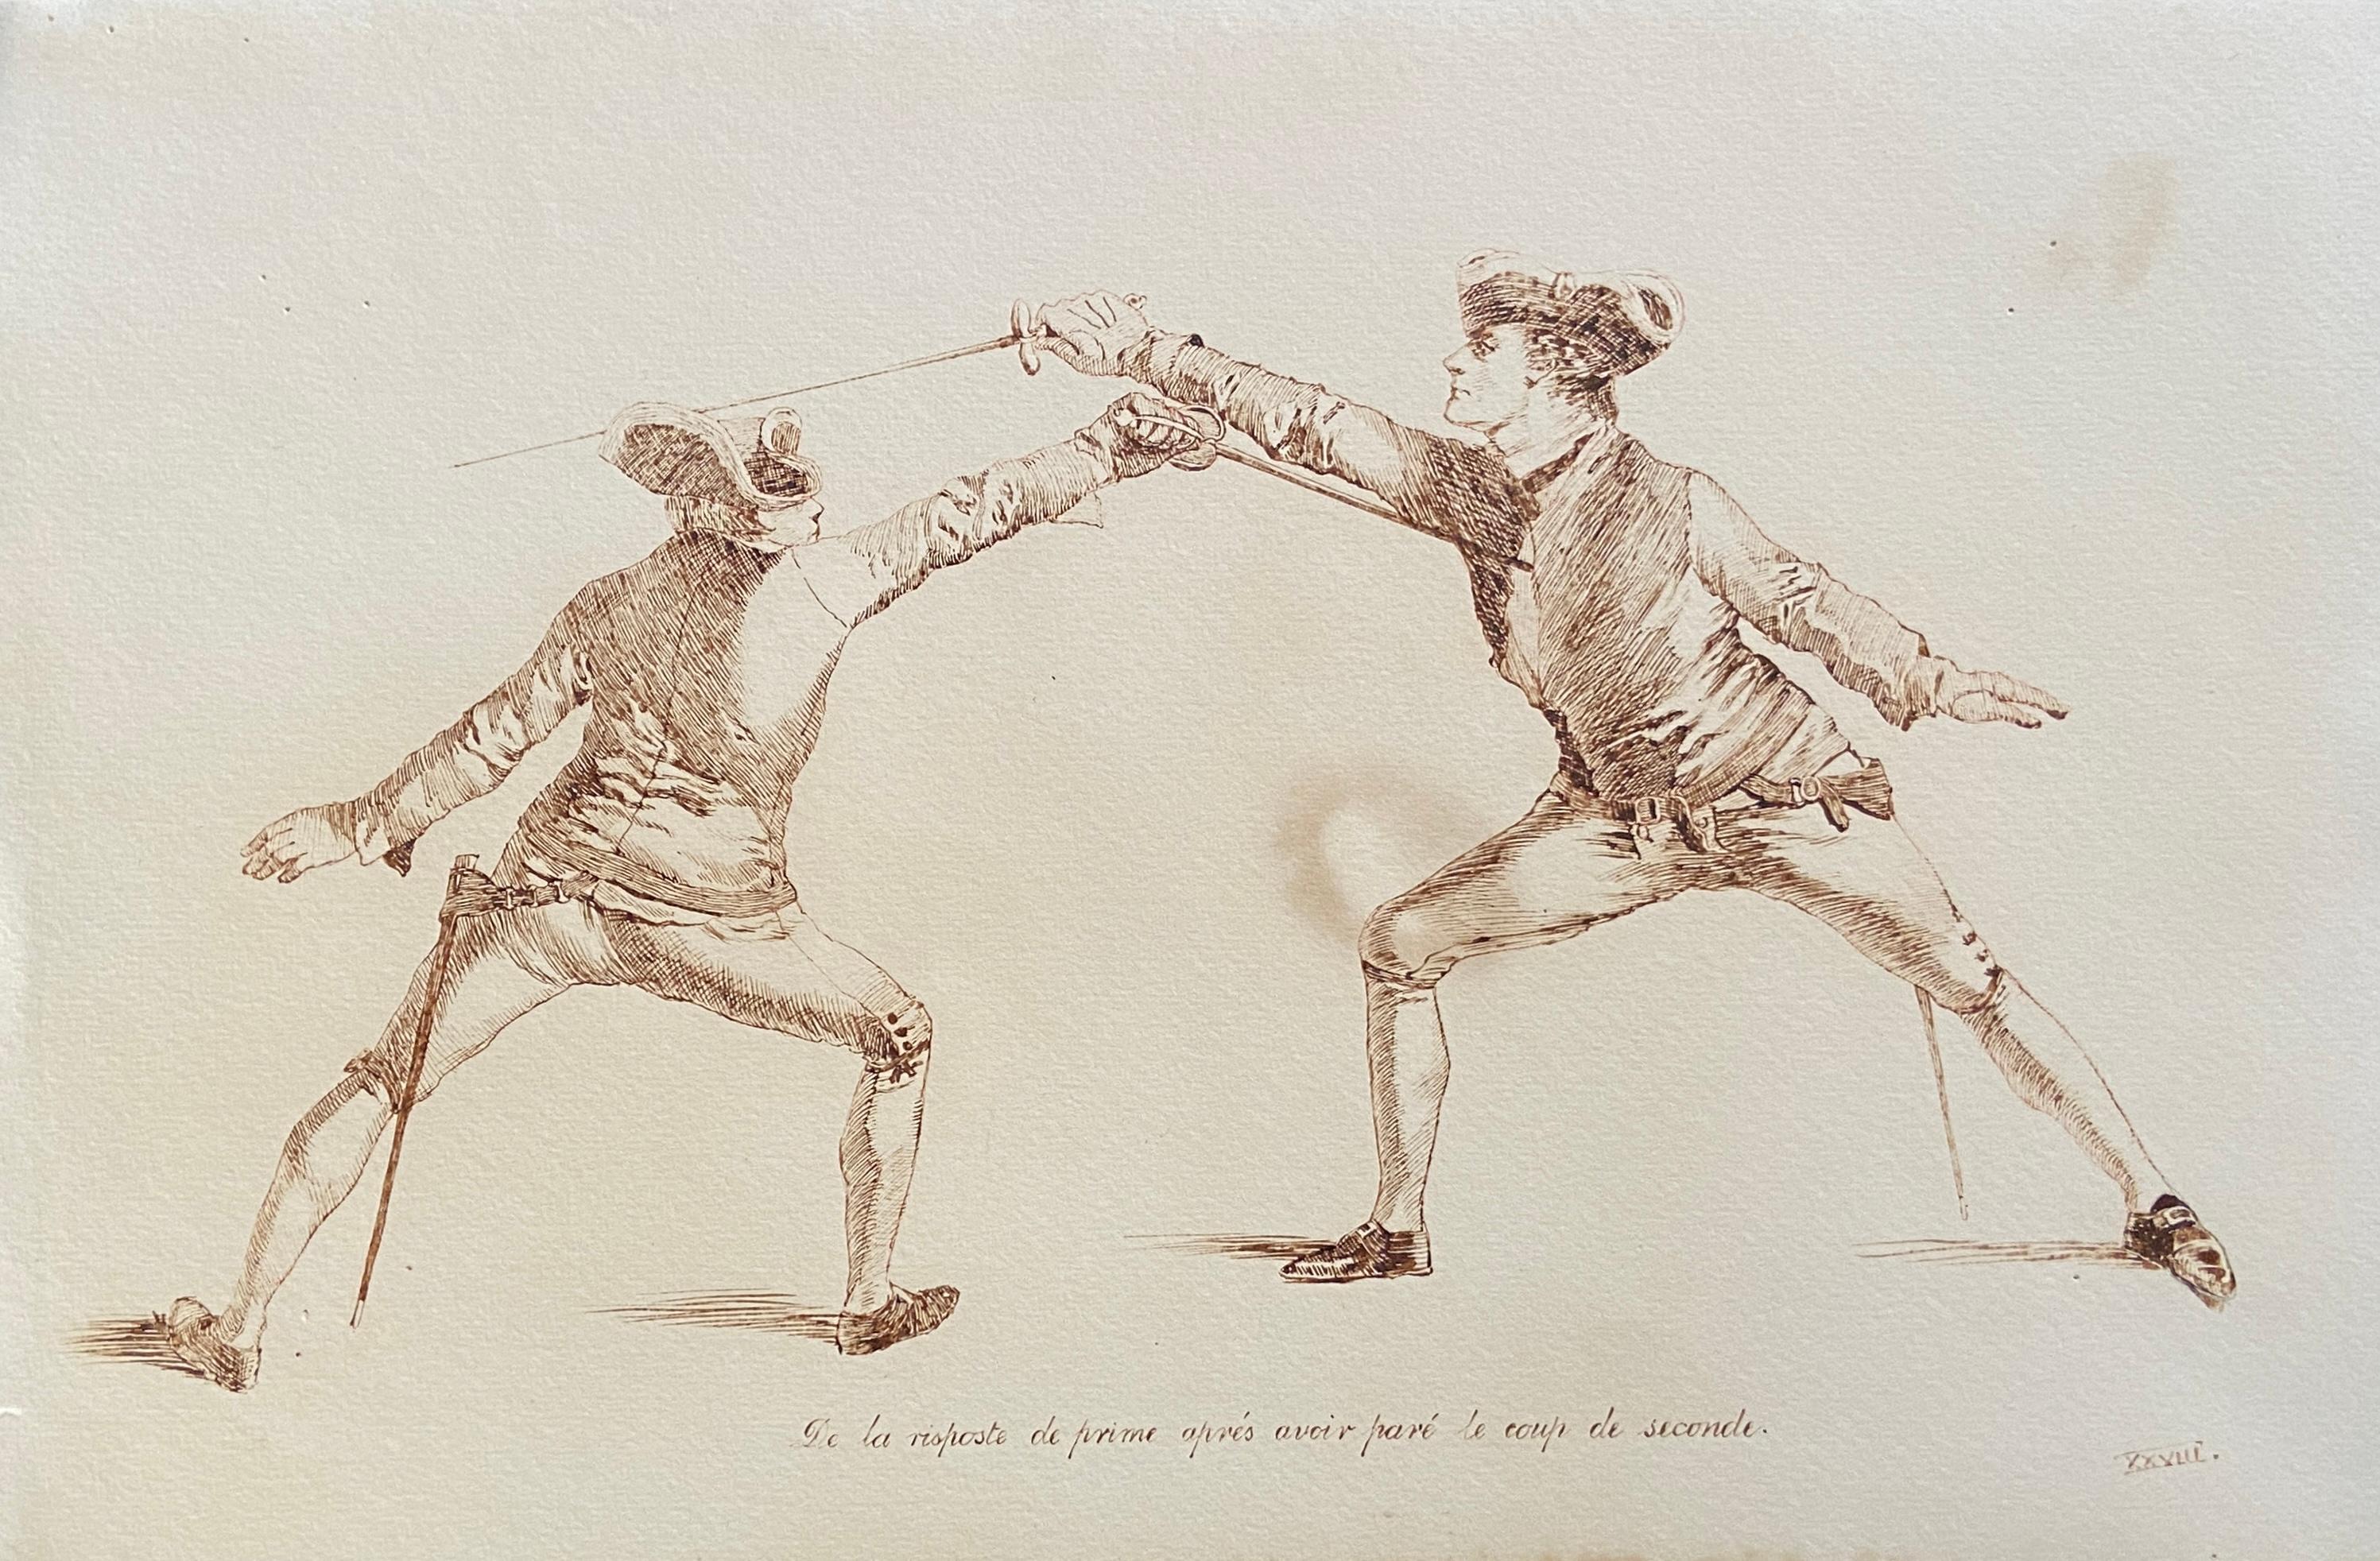 The School of Arms, Pen and Ink Fencing Drawings, c.1920s French - Art by 20th Century French School